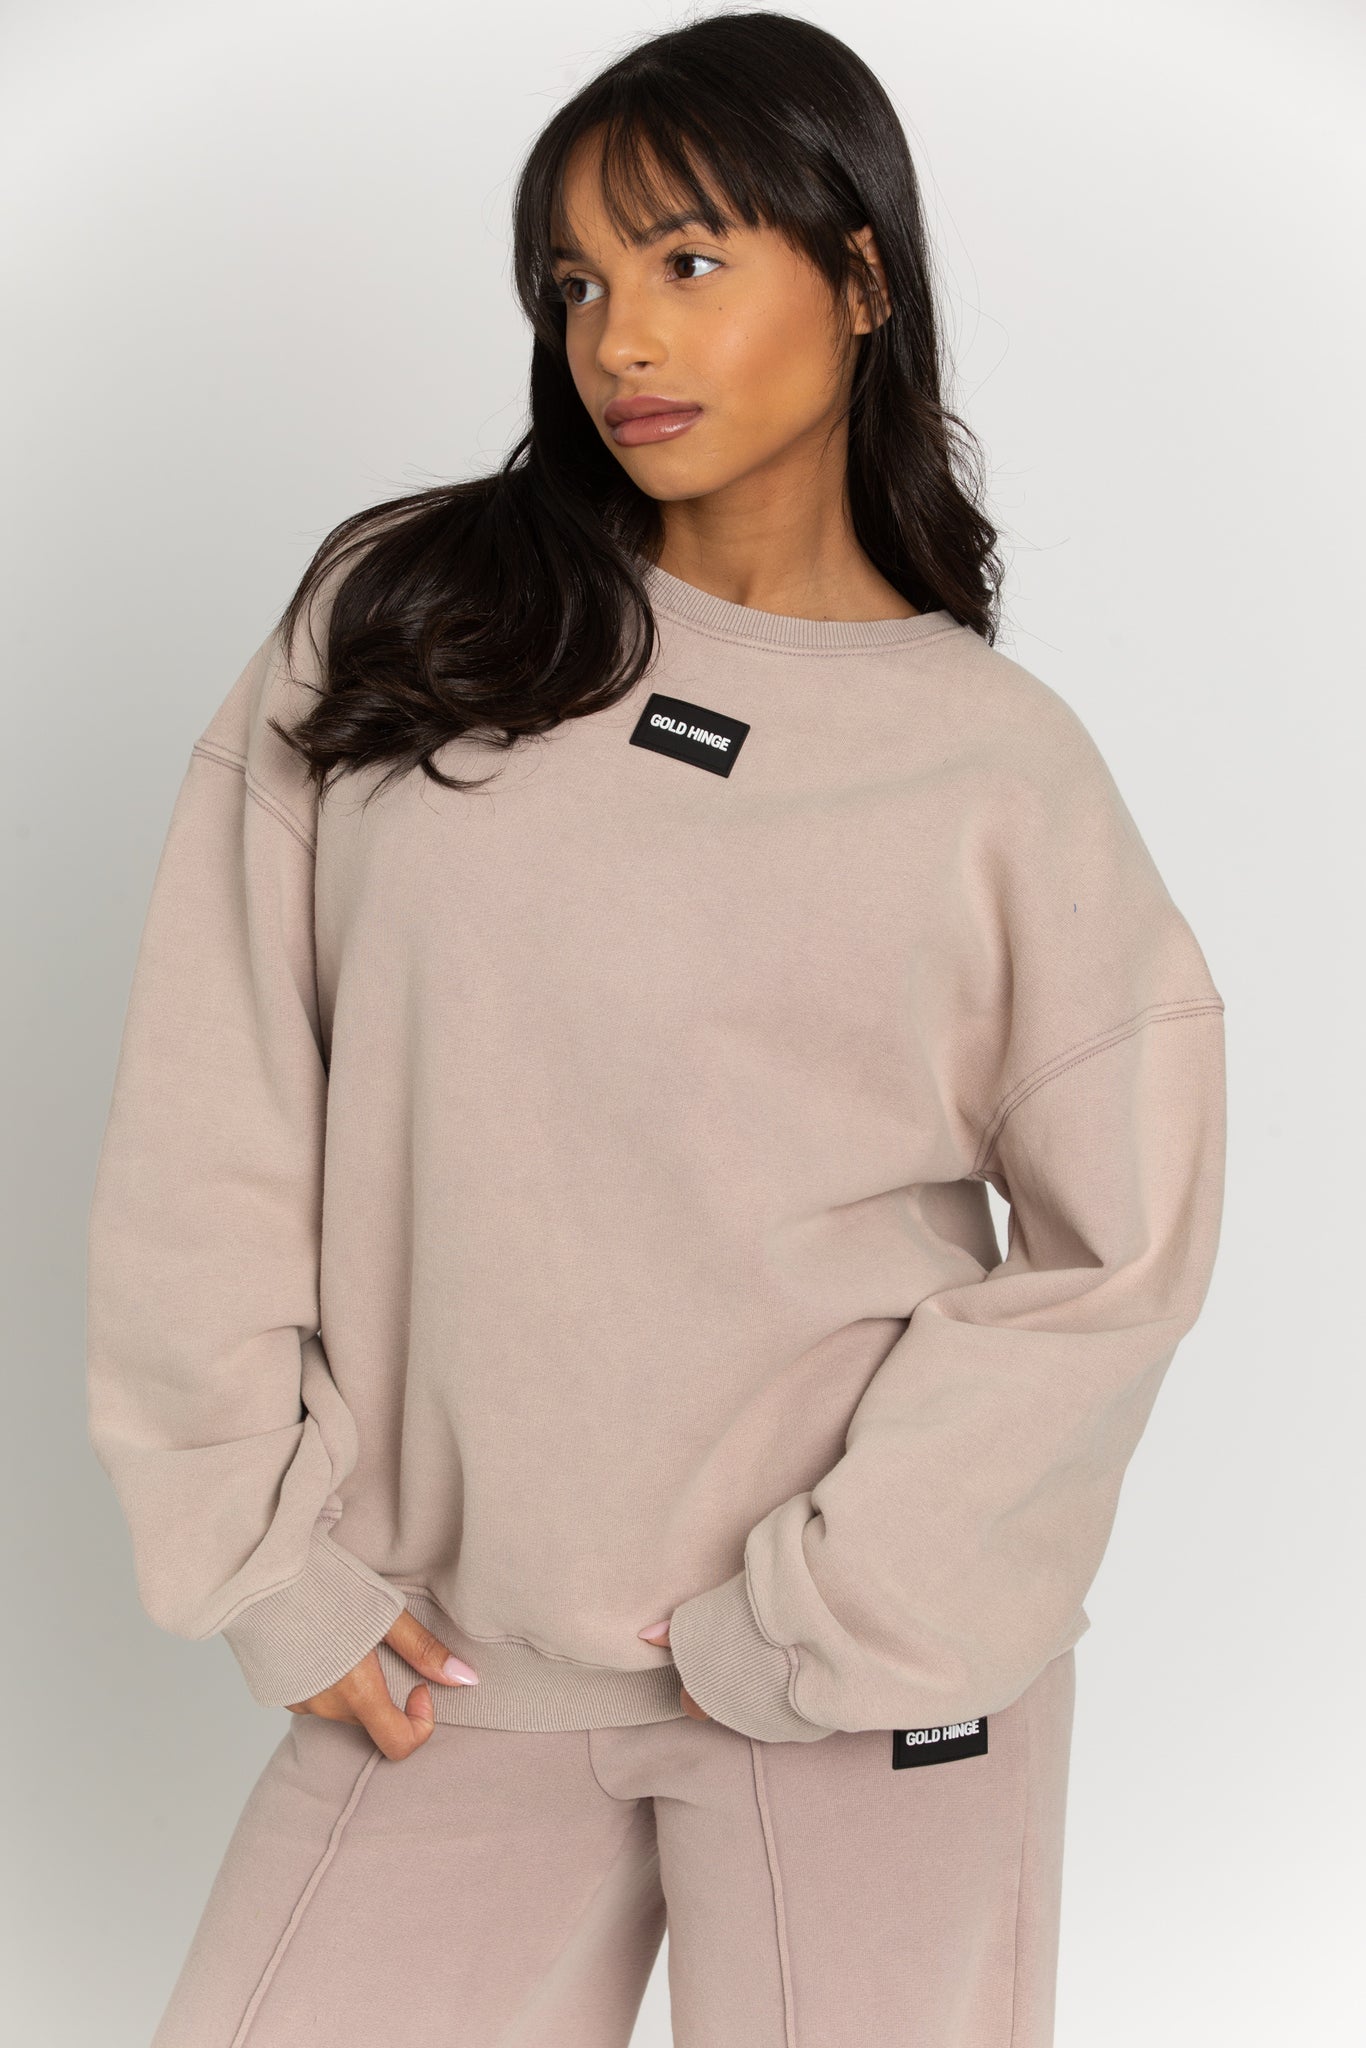 Get the cozy and trendy look you want with our new favorite crewneck. It features a boxy, oversized fit that's perfect for lounging, plus a unique acid wash for a lived-in feel. Complete the look with the matching seamed sweatpants for a cool style that your friends will envy.